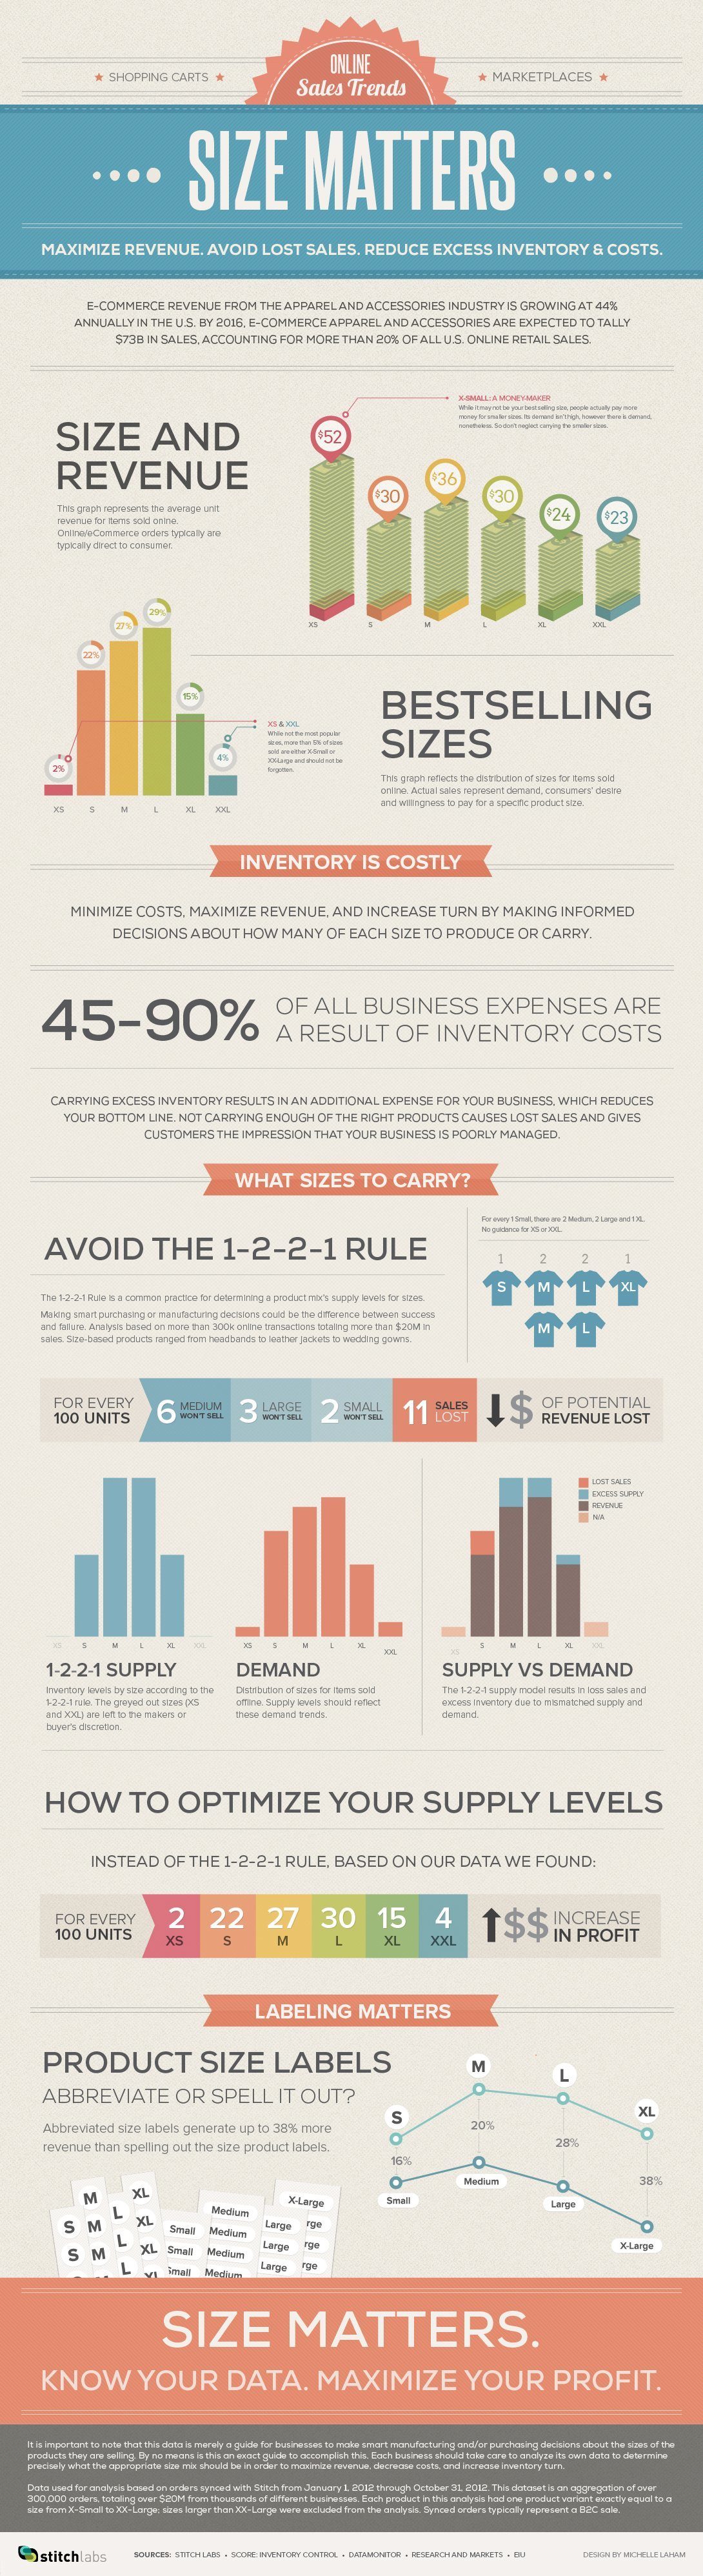 Big data for online retailers: Best practices on selling “sized” inventory